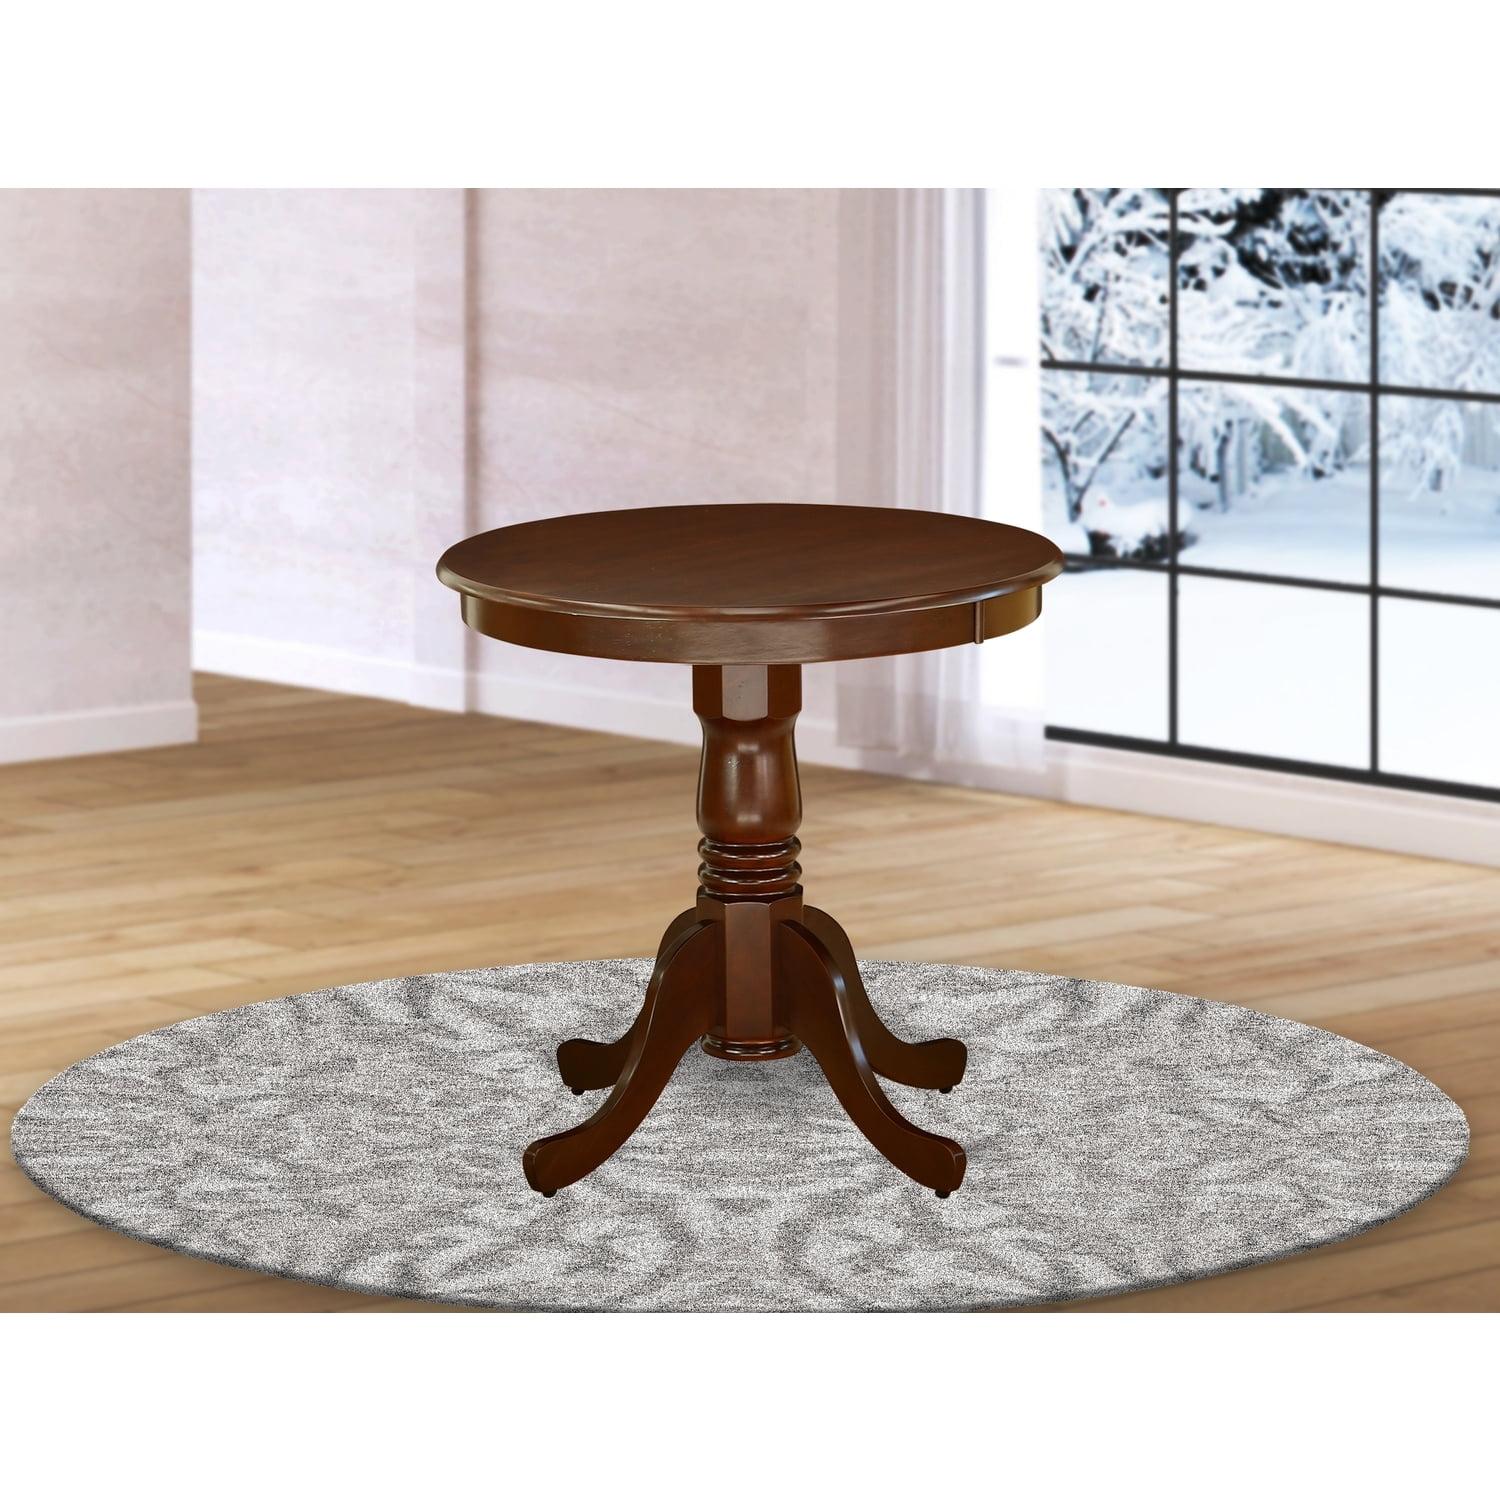 Contemporary Round Rubber Wood Dining Table with Mahogany Finish